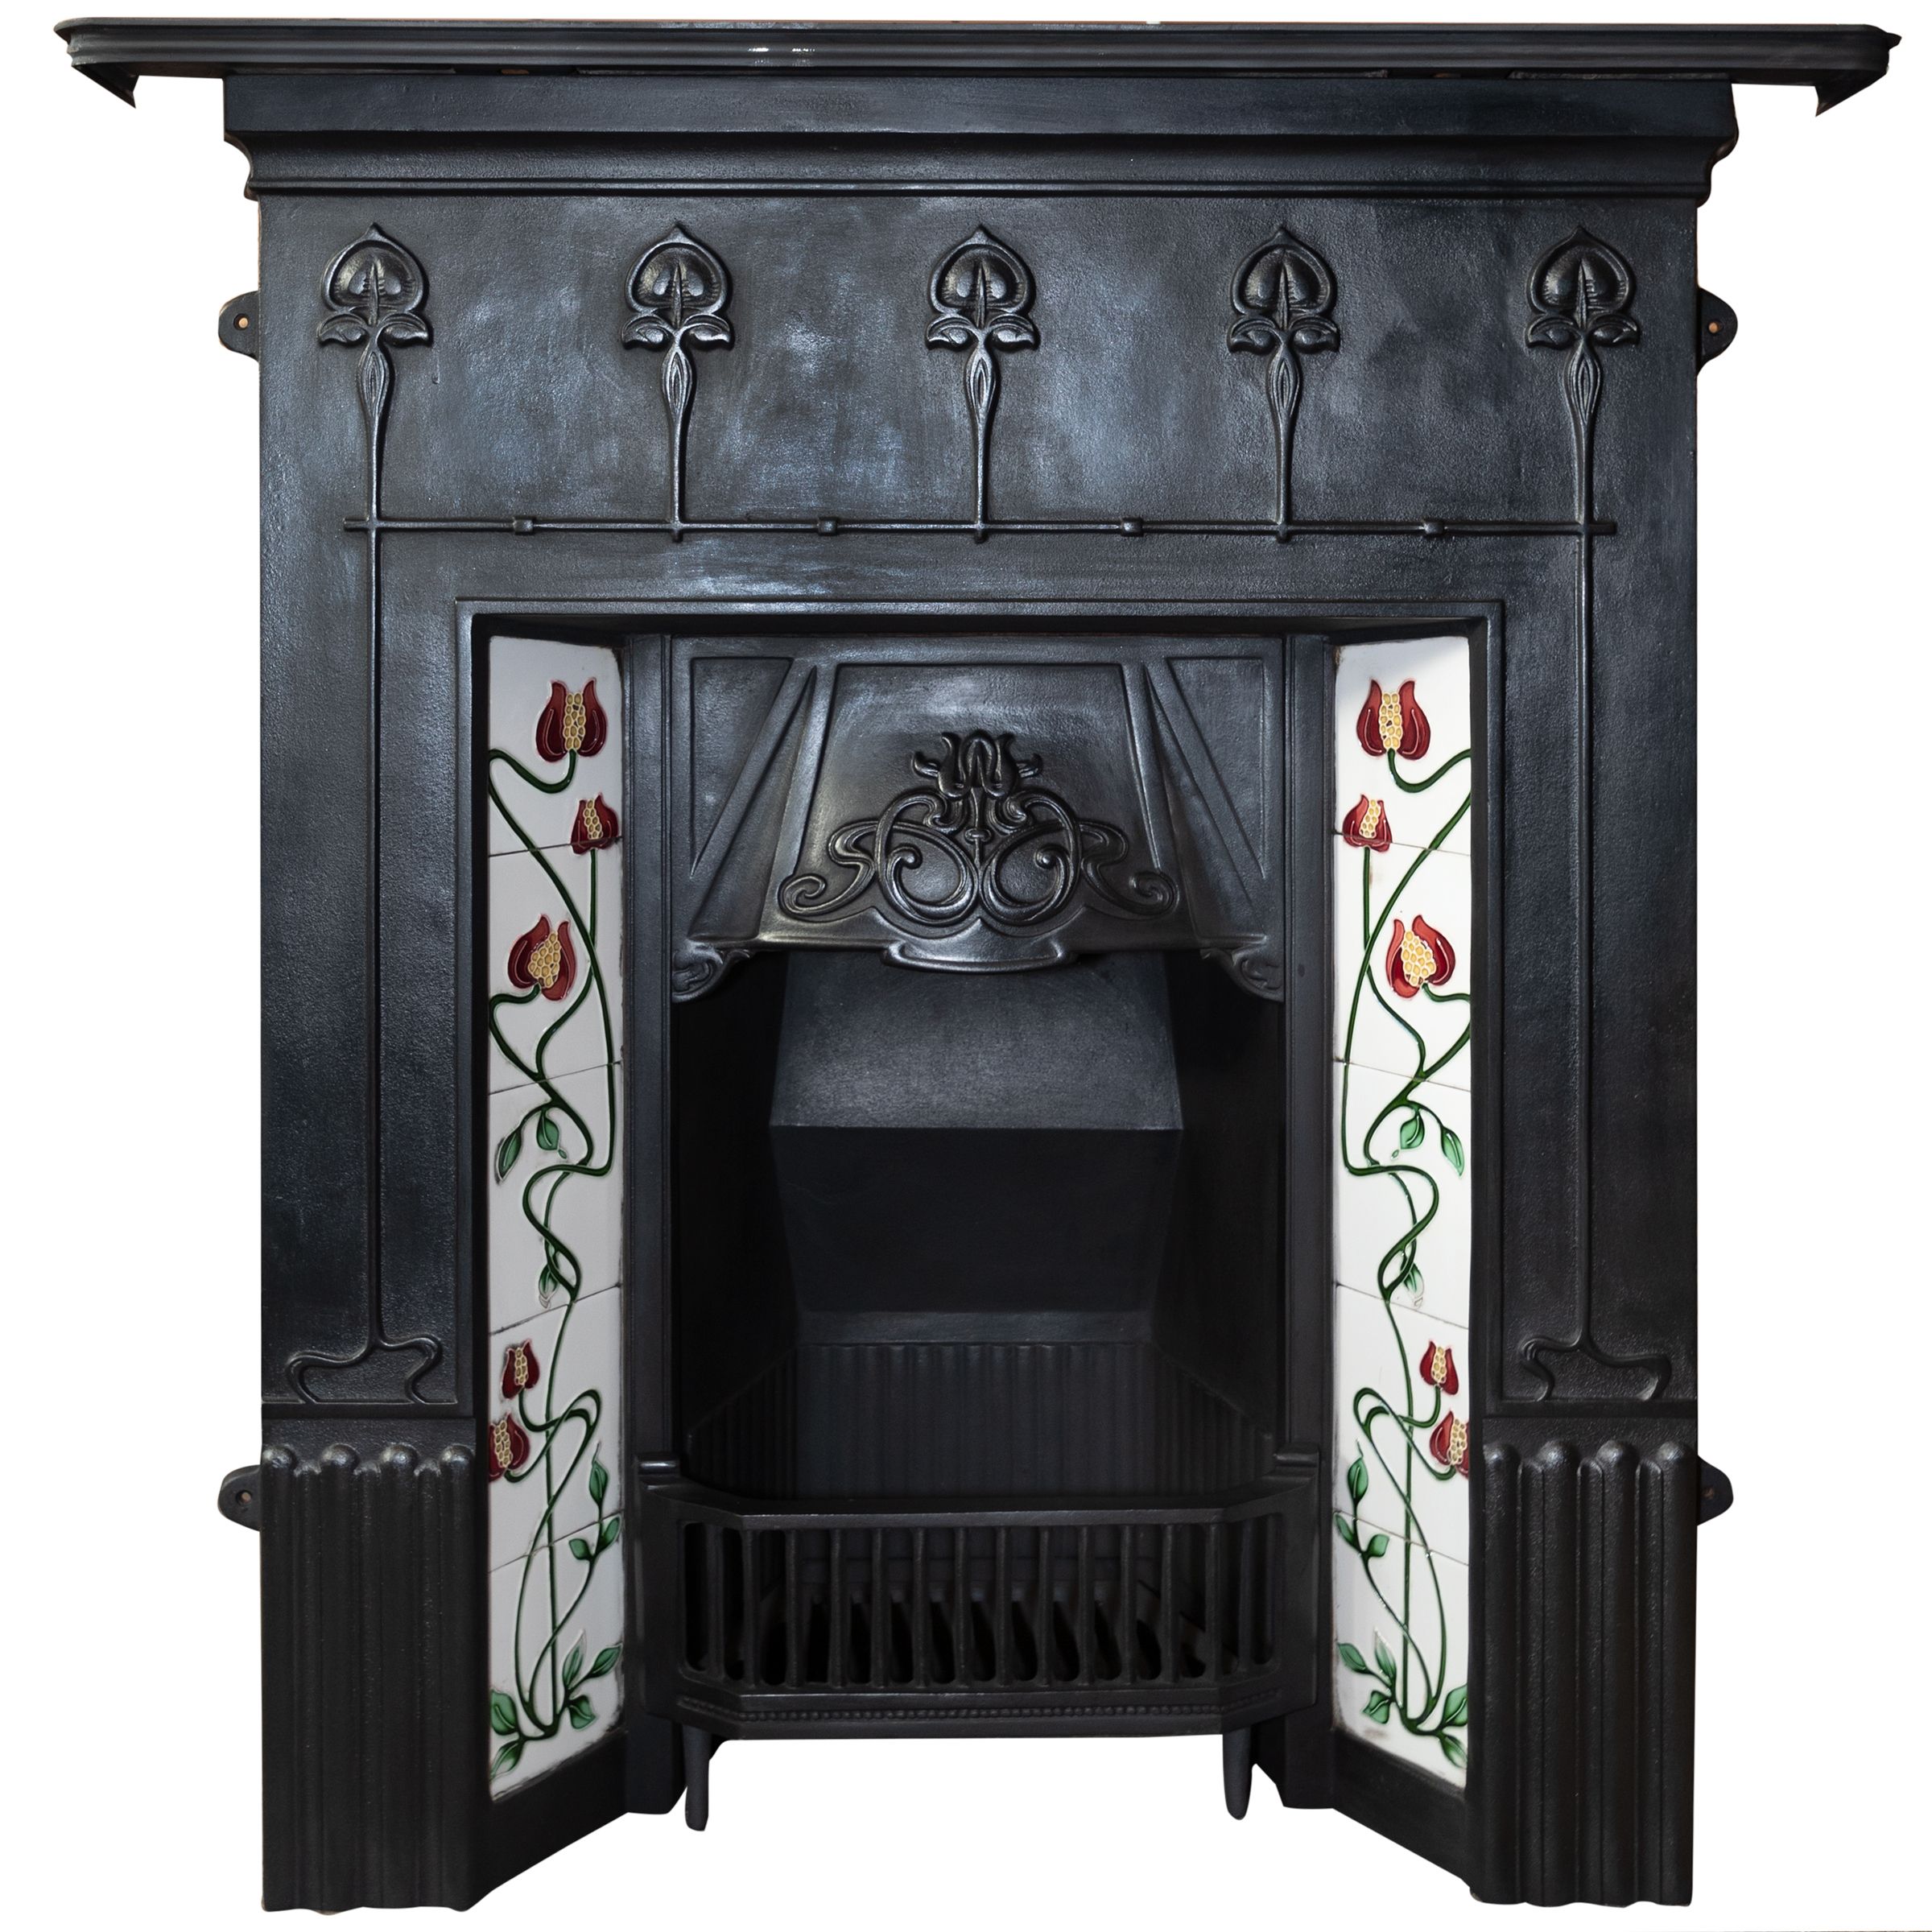 Cast Iron Fireplace Cover Beautiful Huge Selection Of Antique Cast Iron Fireplaces Fully